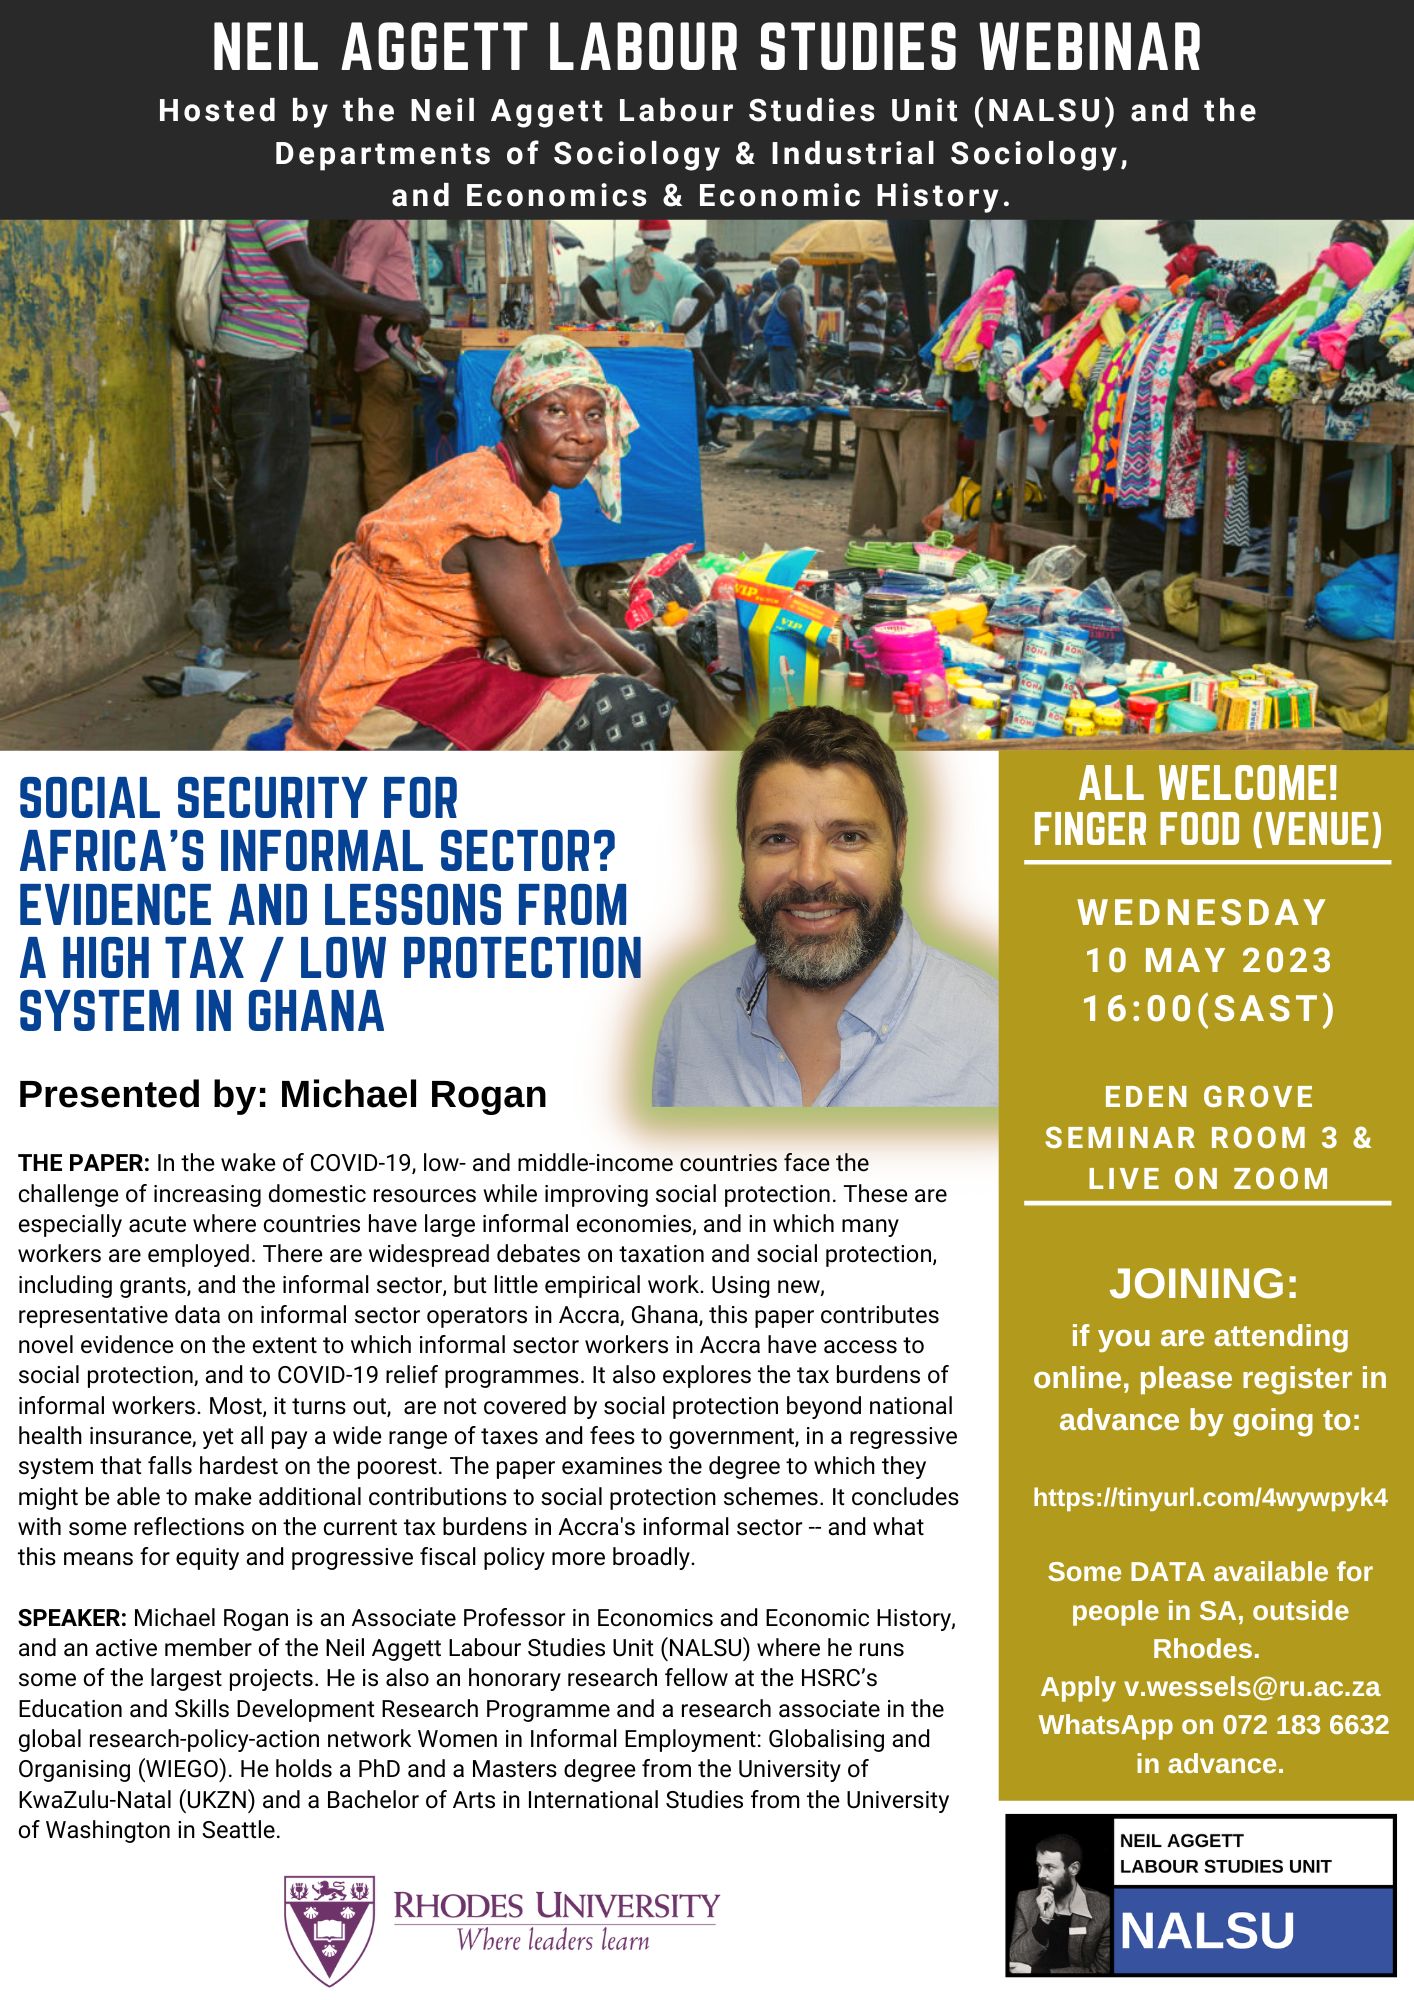 “Social Security for Africa's Informal Sector? Evidence and Lessons from a High Tax / Low Protection System in Ghana"